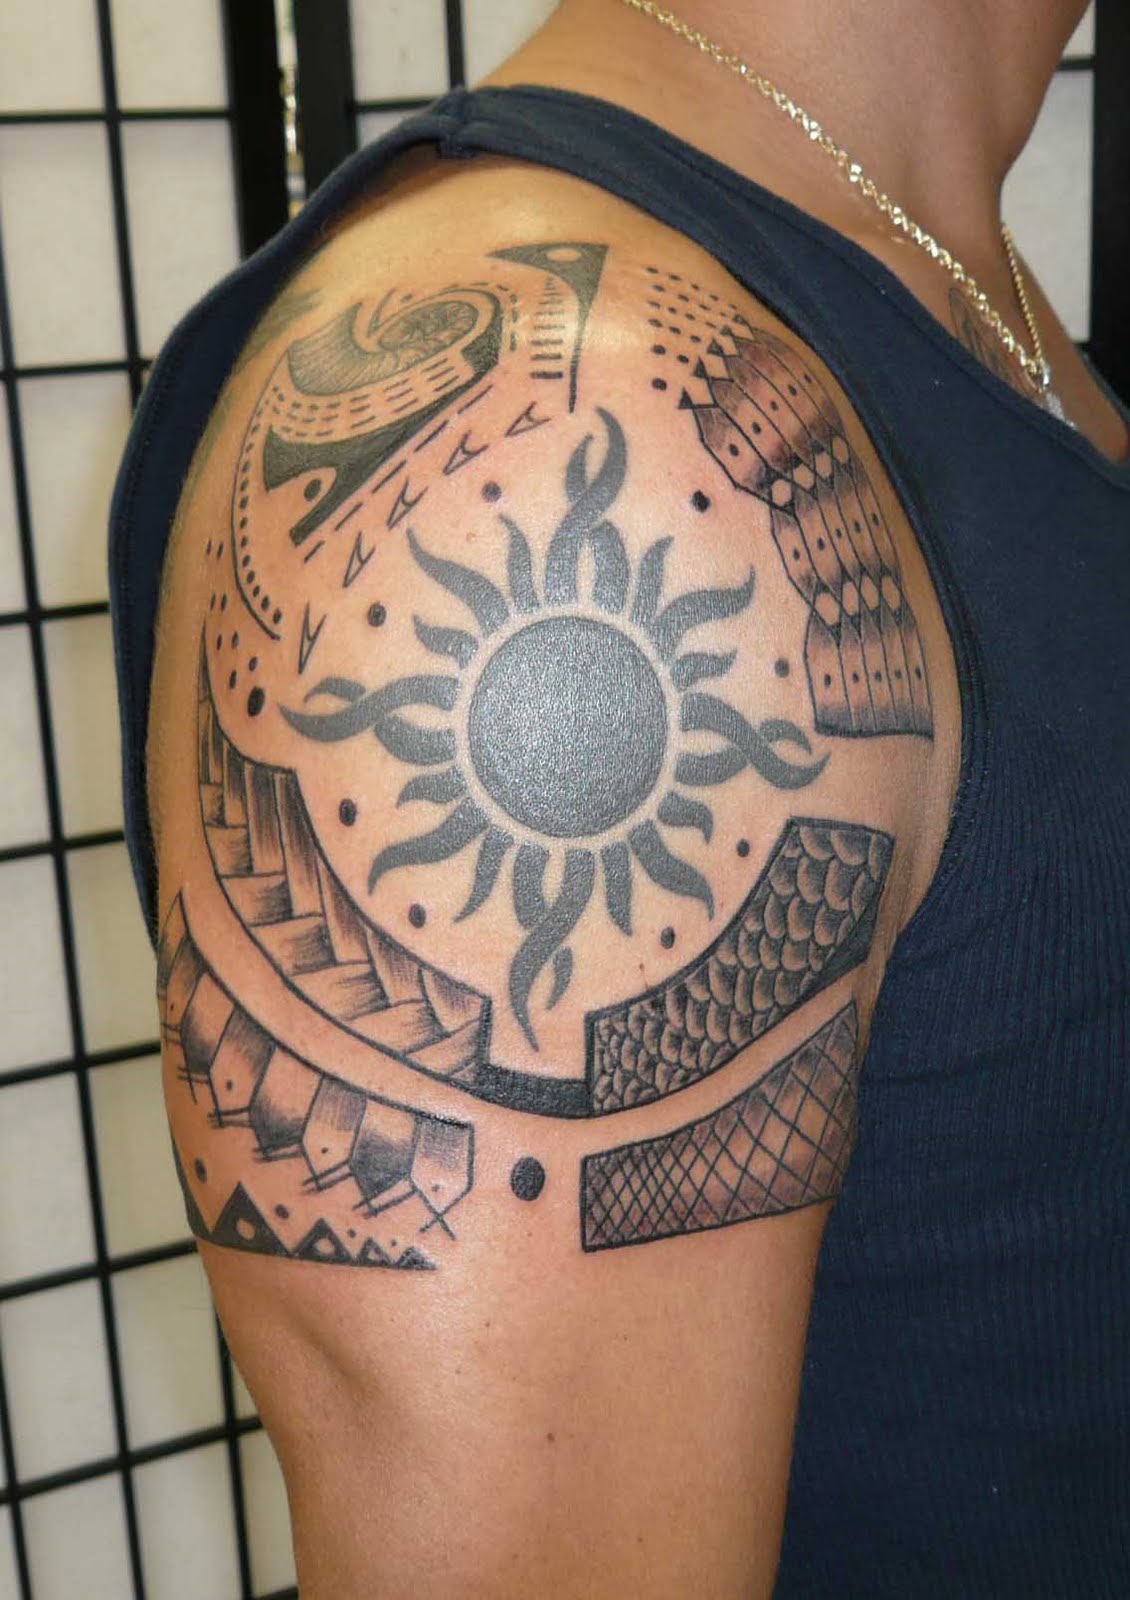 Polynesian Tattoos Designs, Ideas and Meaning | Tattoos For You